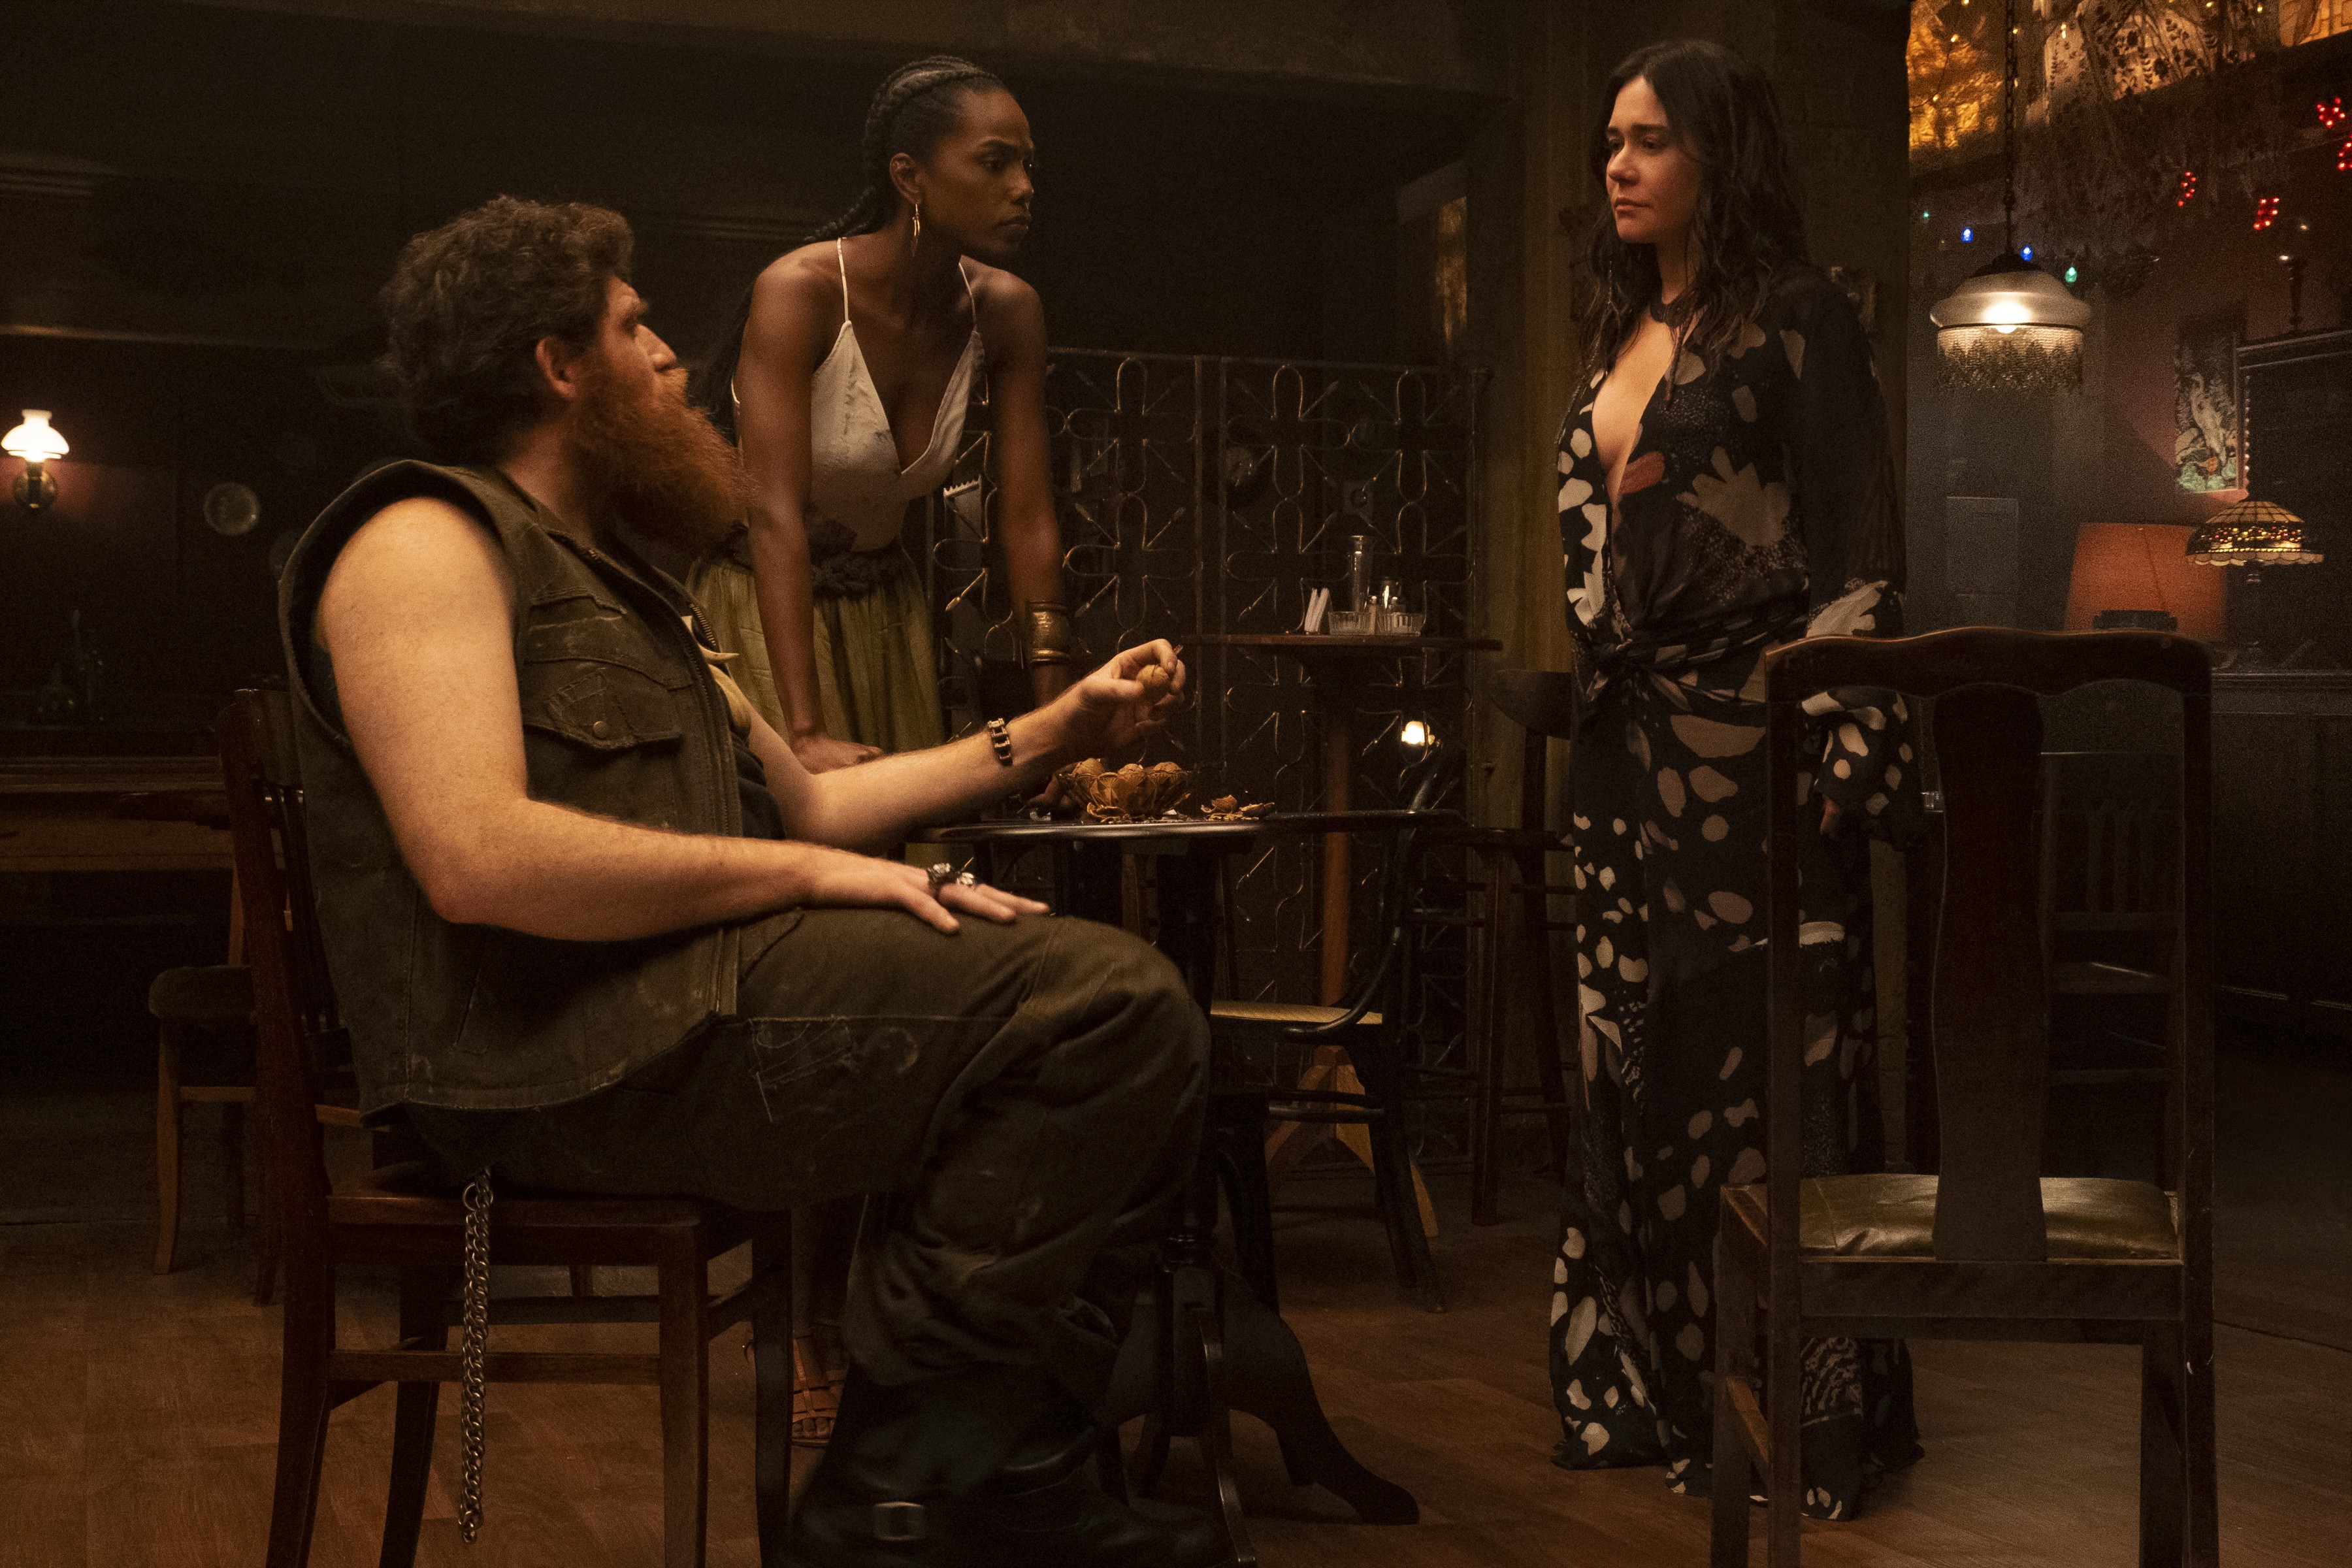 INVISIBLE CITY (L-R) JIMMY LONDON as TUTU, JESSICA CORES as CAMILA, and ALESSANDRA NEGRINI as IN (Foto: Cr. ALISSON LOUBACK / NETFLIX )